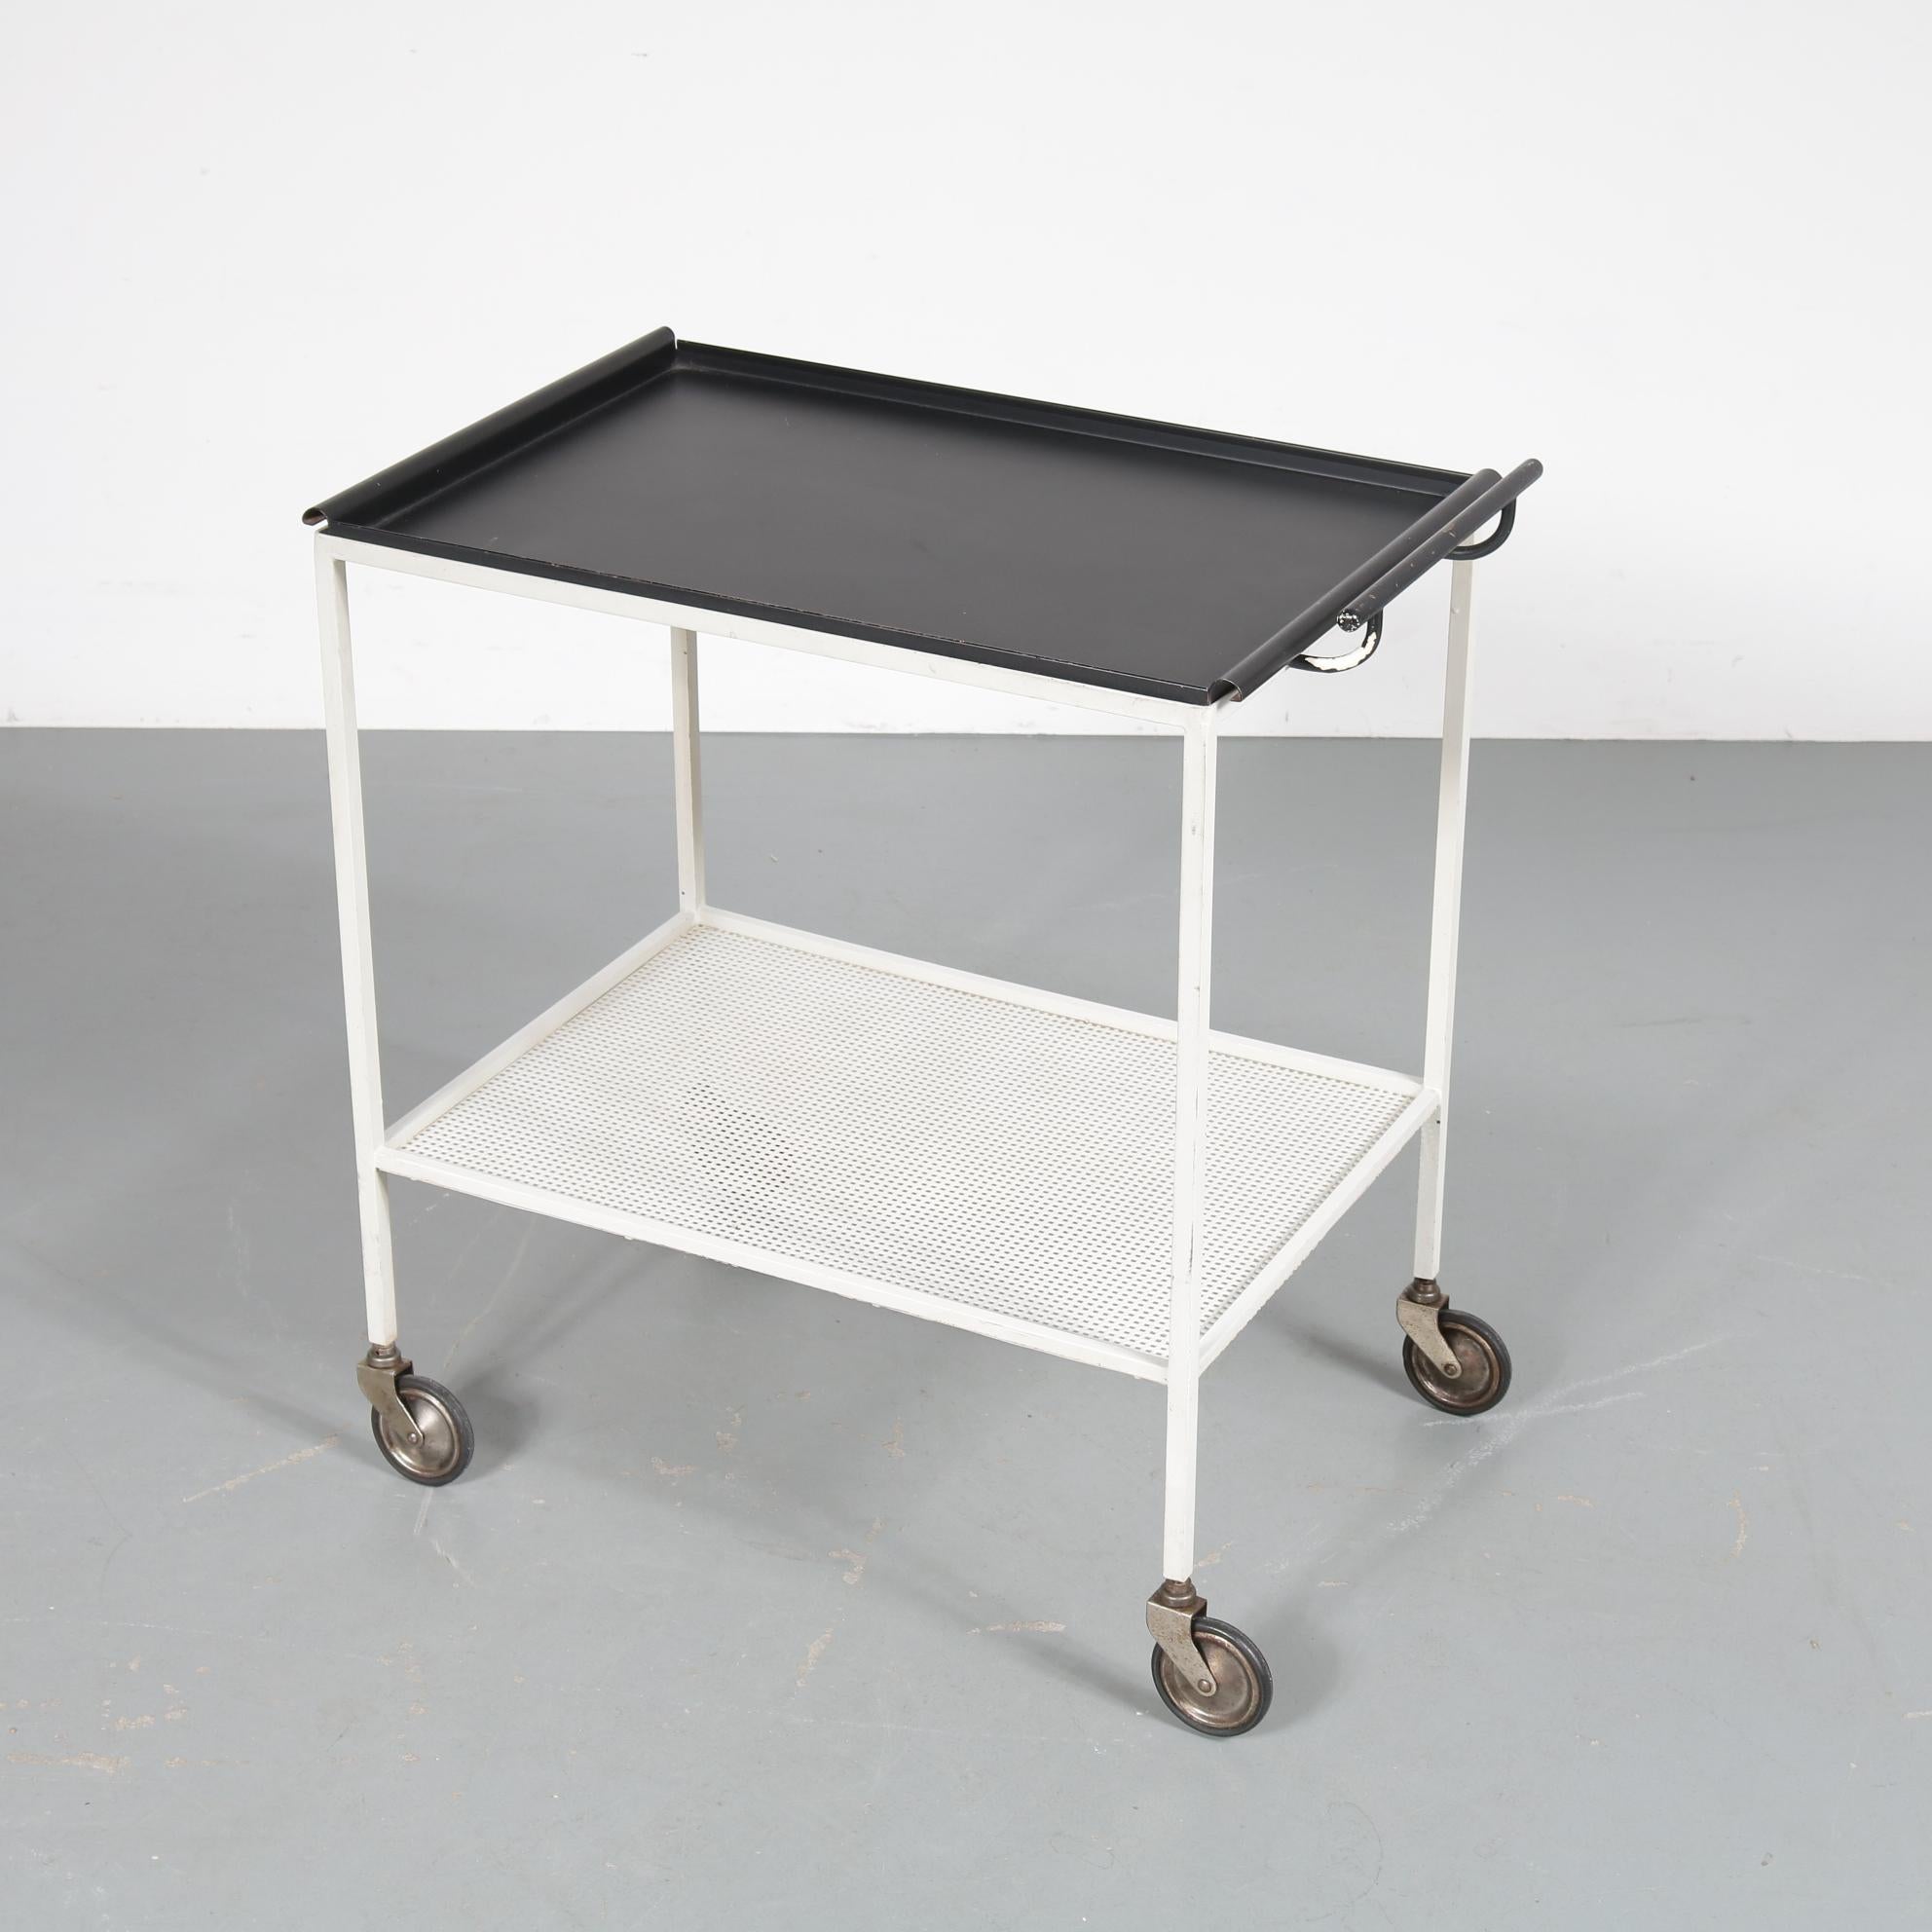 A beautiful metal trolley by French designer Mathieu Matégot, manufactured by Artimeta in the Netherlands in 1957.

This highly recognizable model is named 